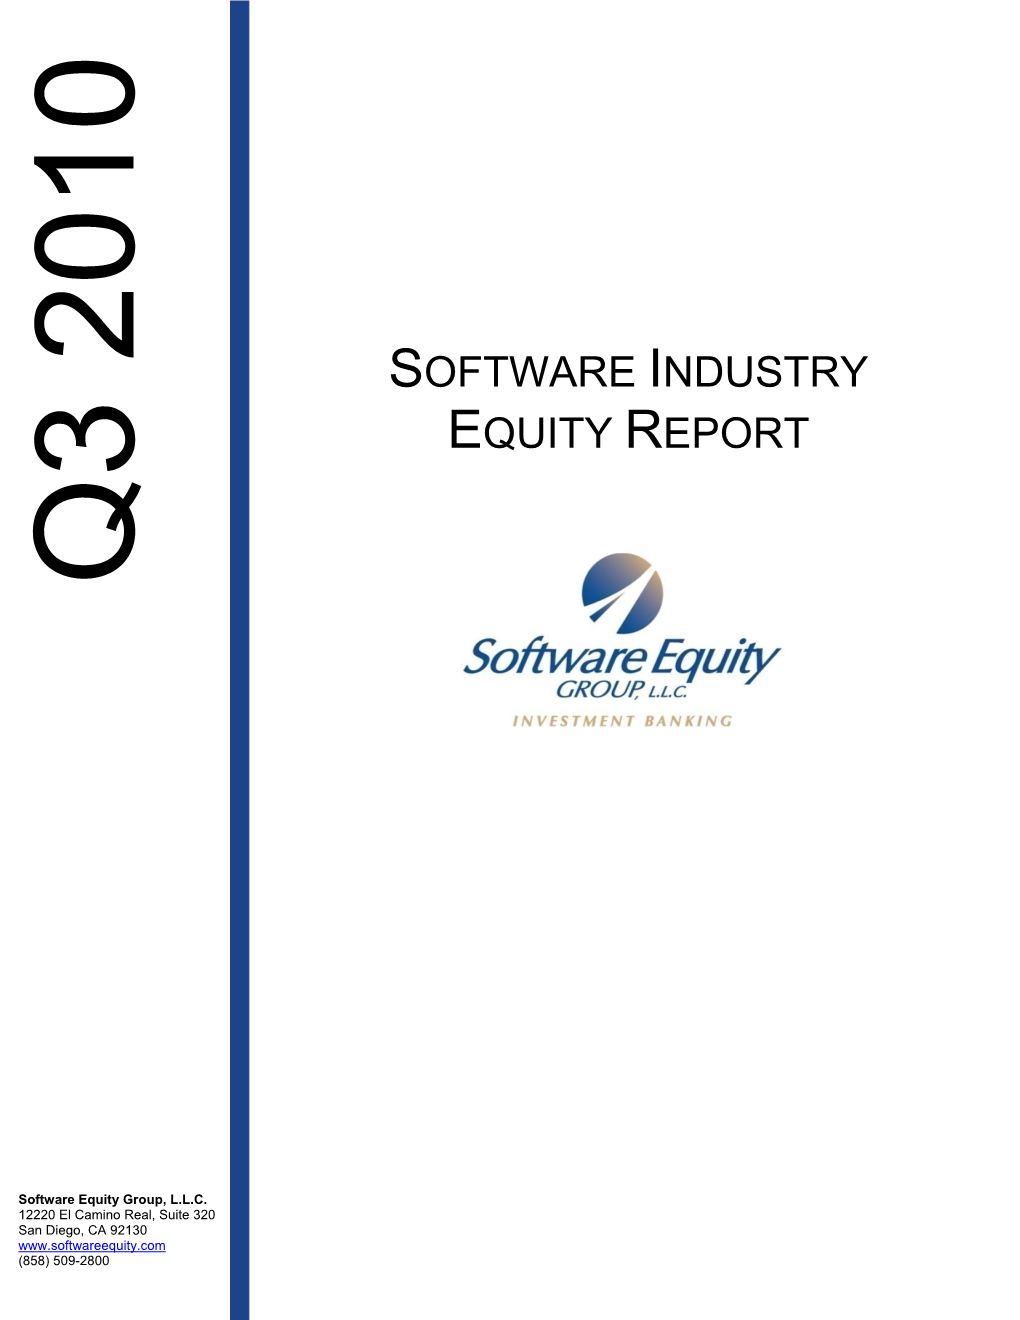 Software Industry Equity Report